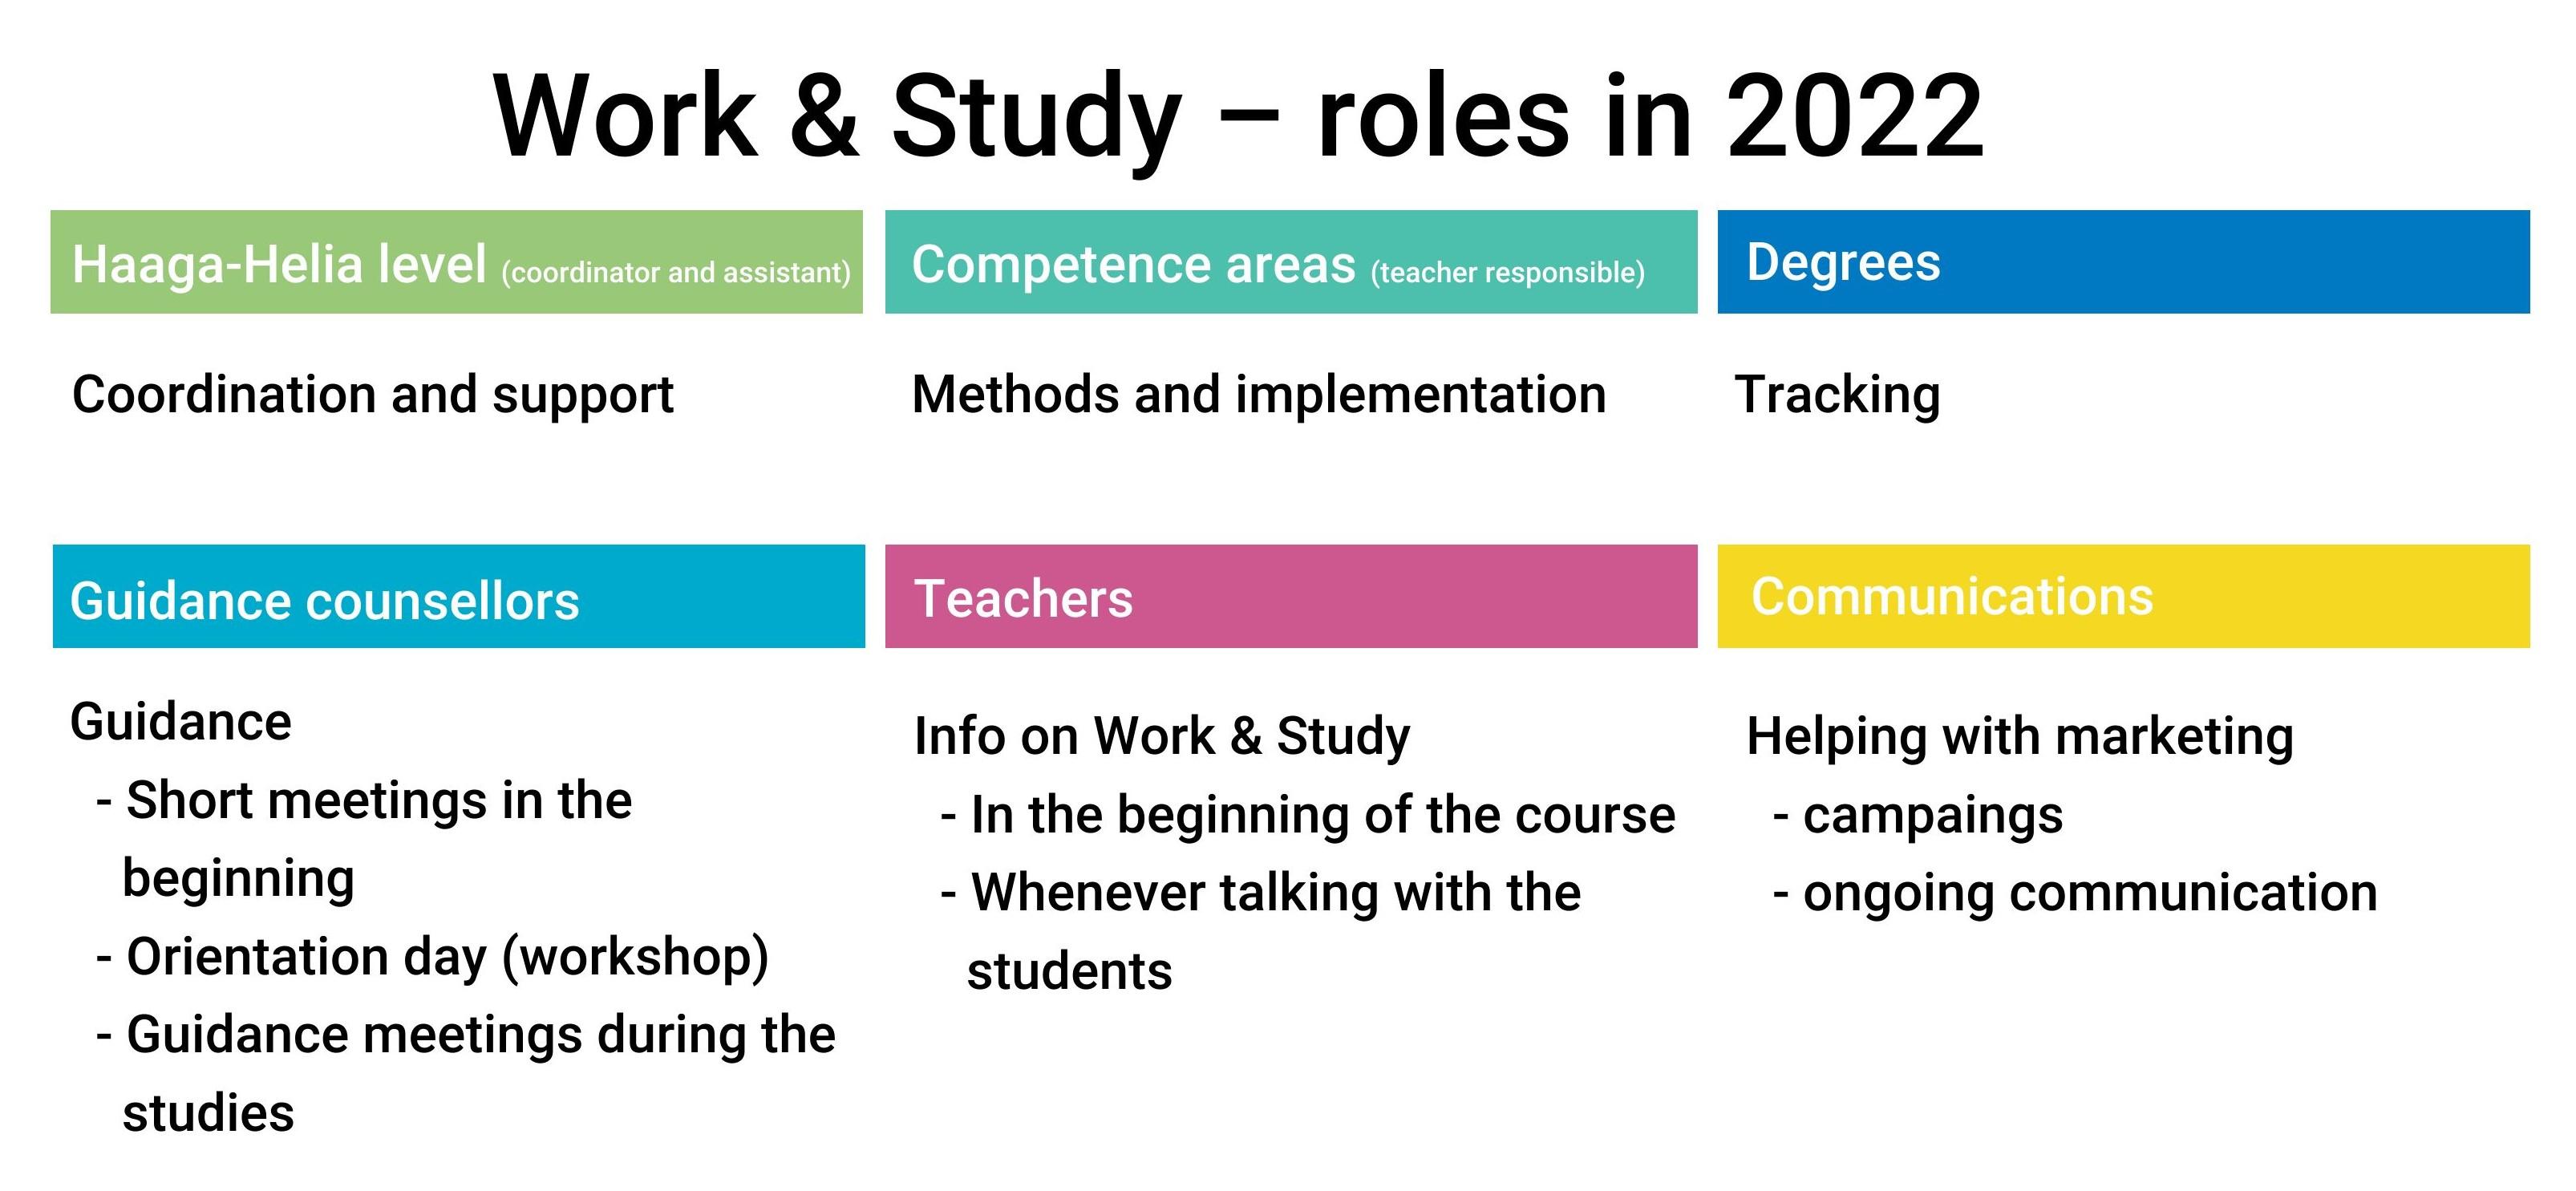 Picture 29. Works&Study roles